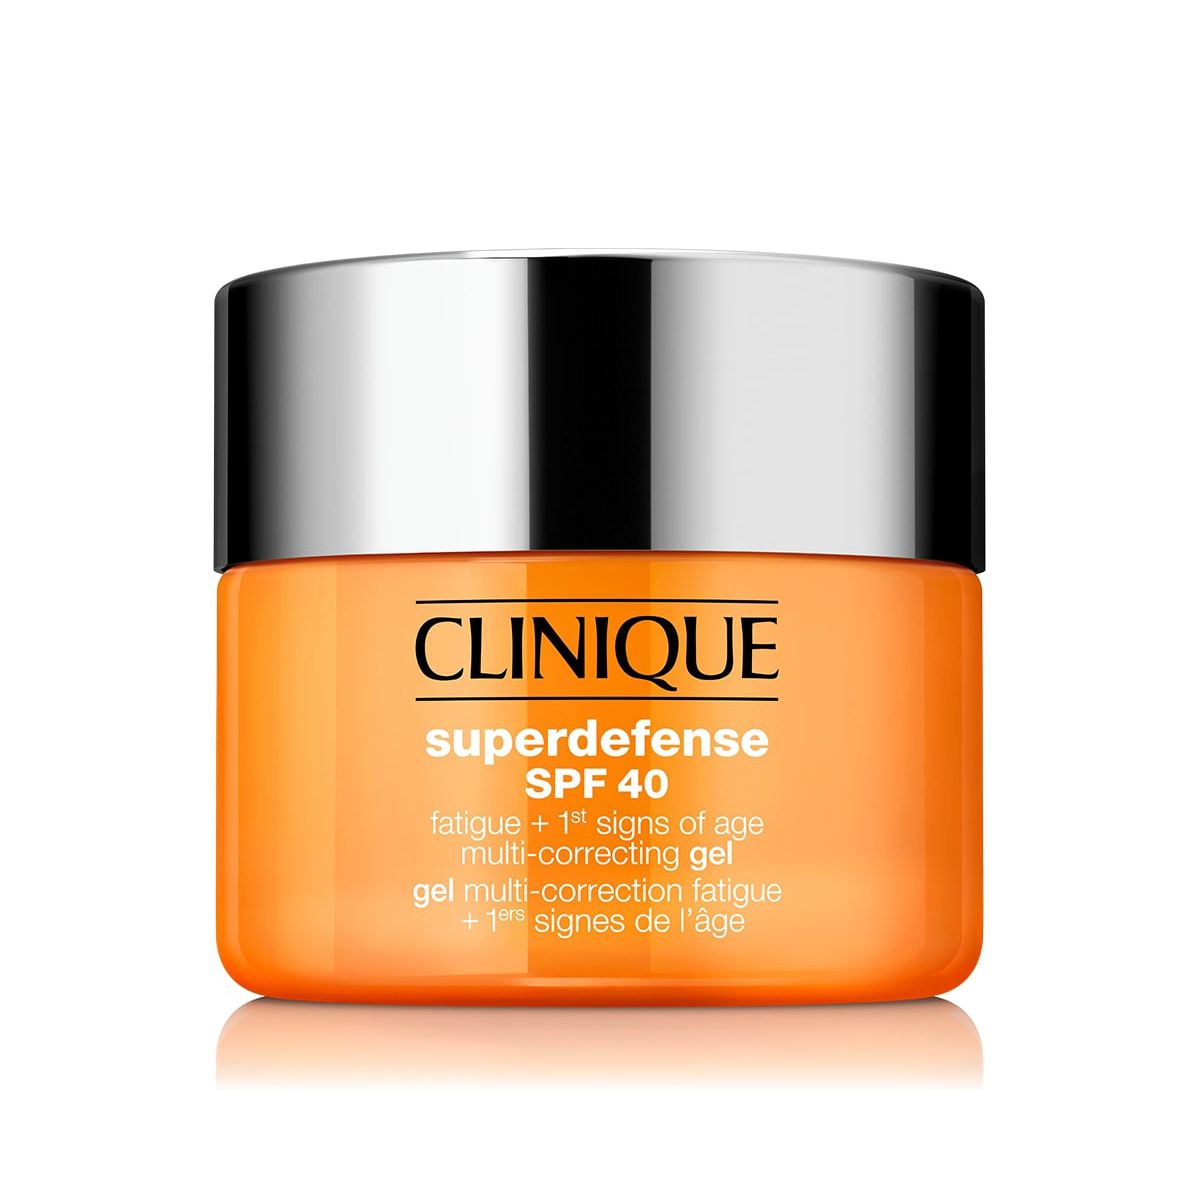 CLINIQUE Superdefense™ SPF 40 Fatigue + 1st Signs Of Age Multi-Correcting Gel